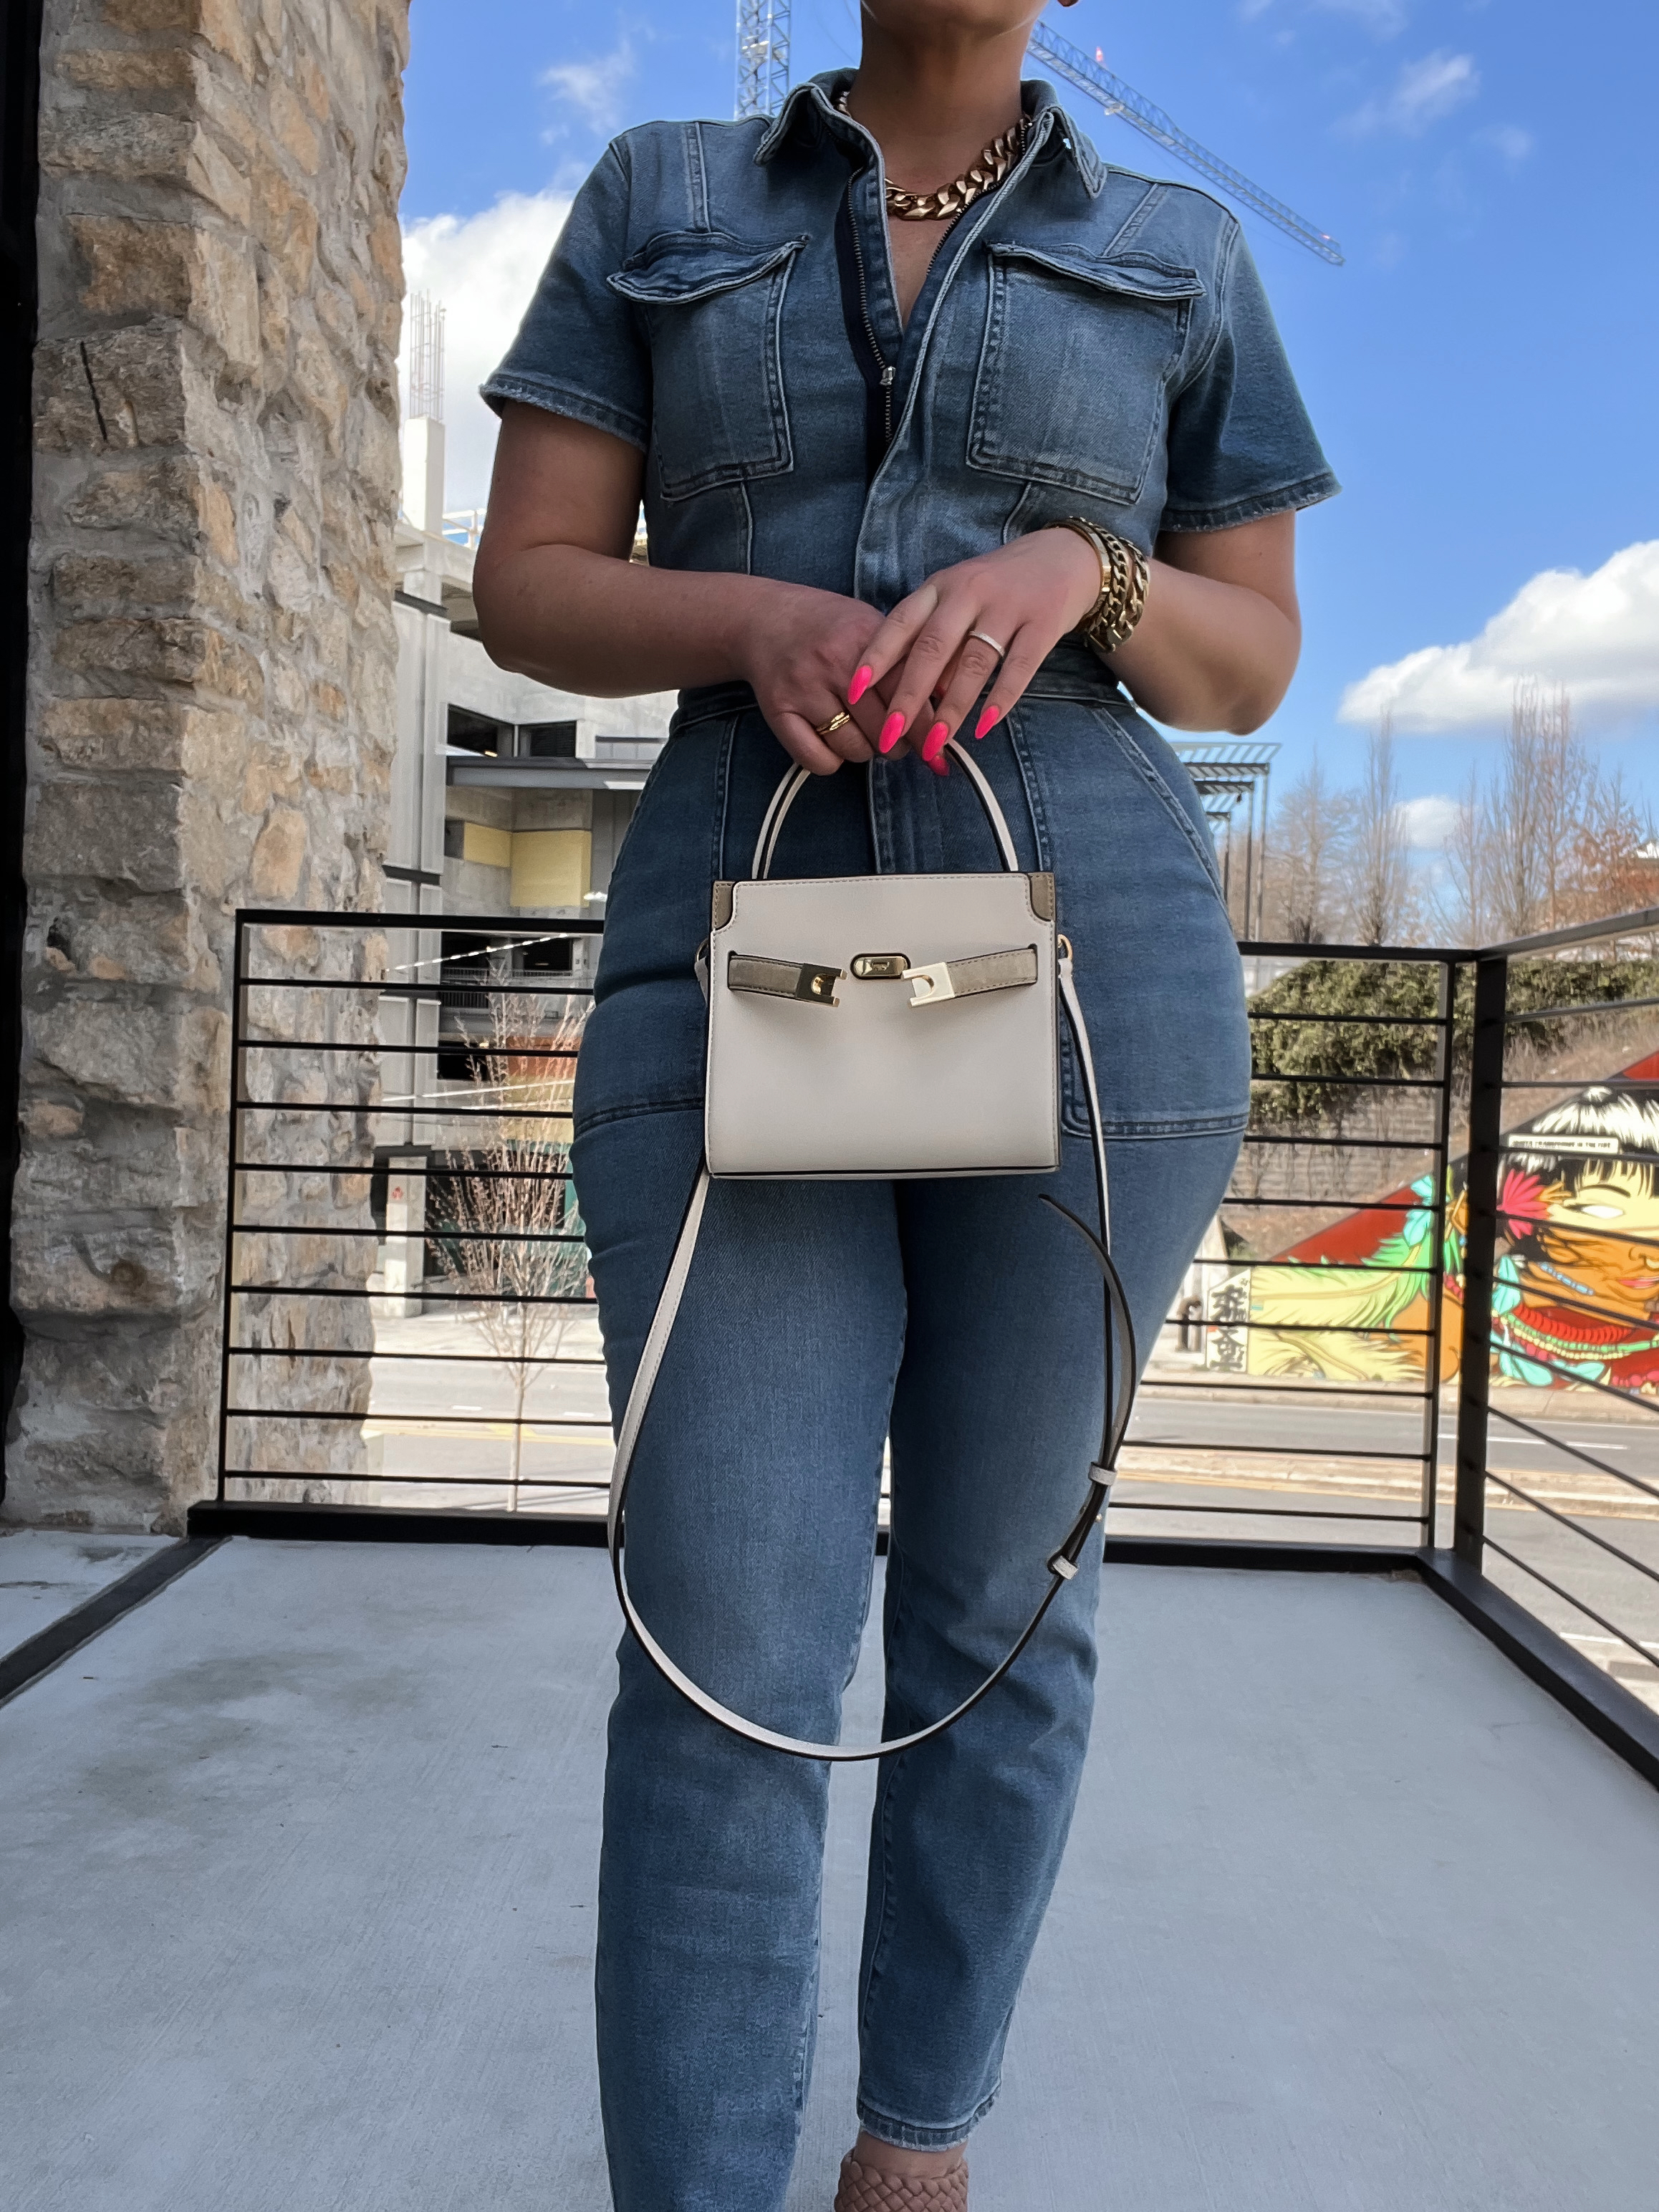 21 SPRING OUTFIT IDEAS: SPRING STYLING SERIES WEEK 1